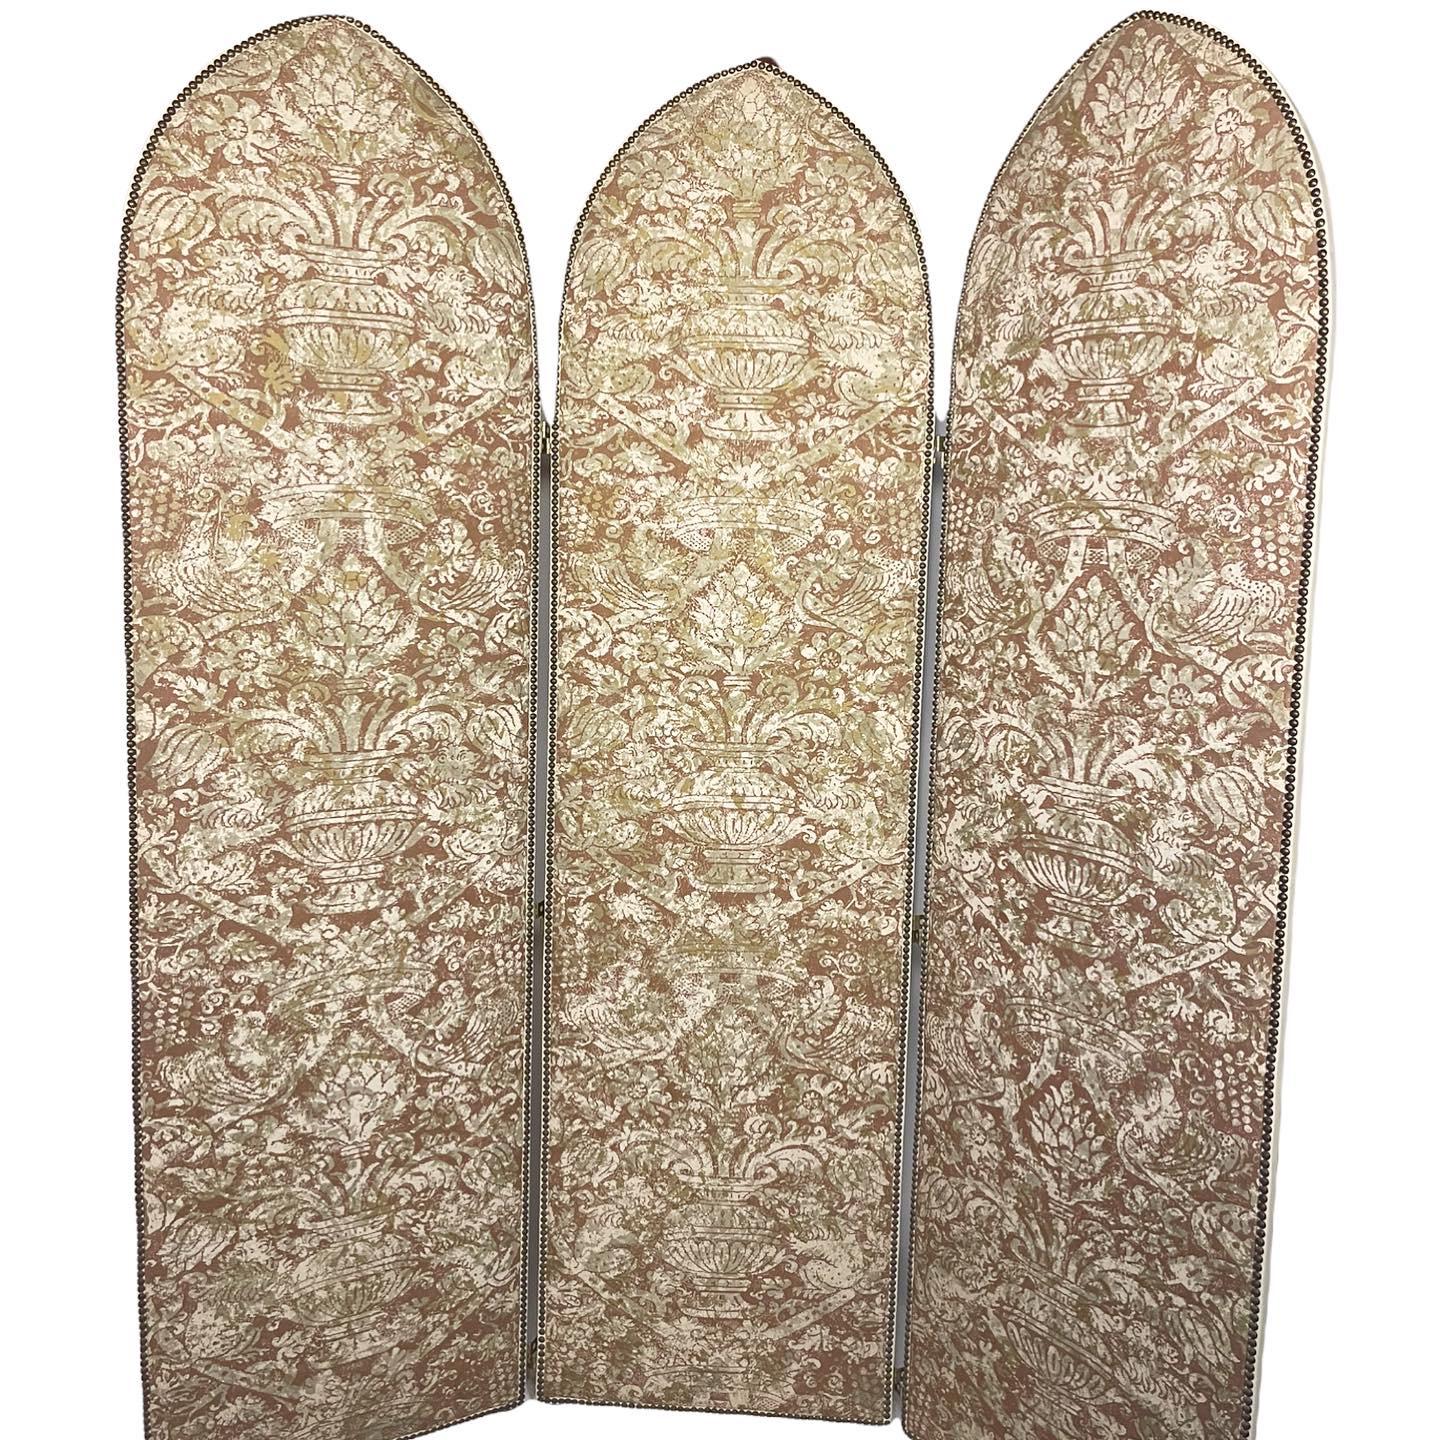 20th Century Fortuny Room Divider/Screen in Beige and Gold with White Leather Trim